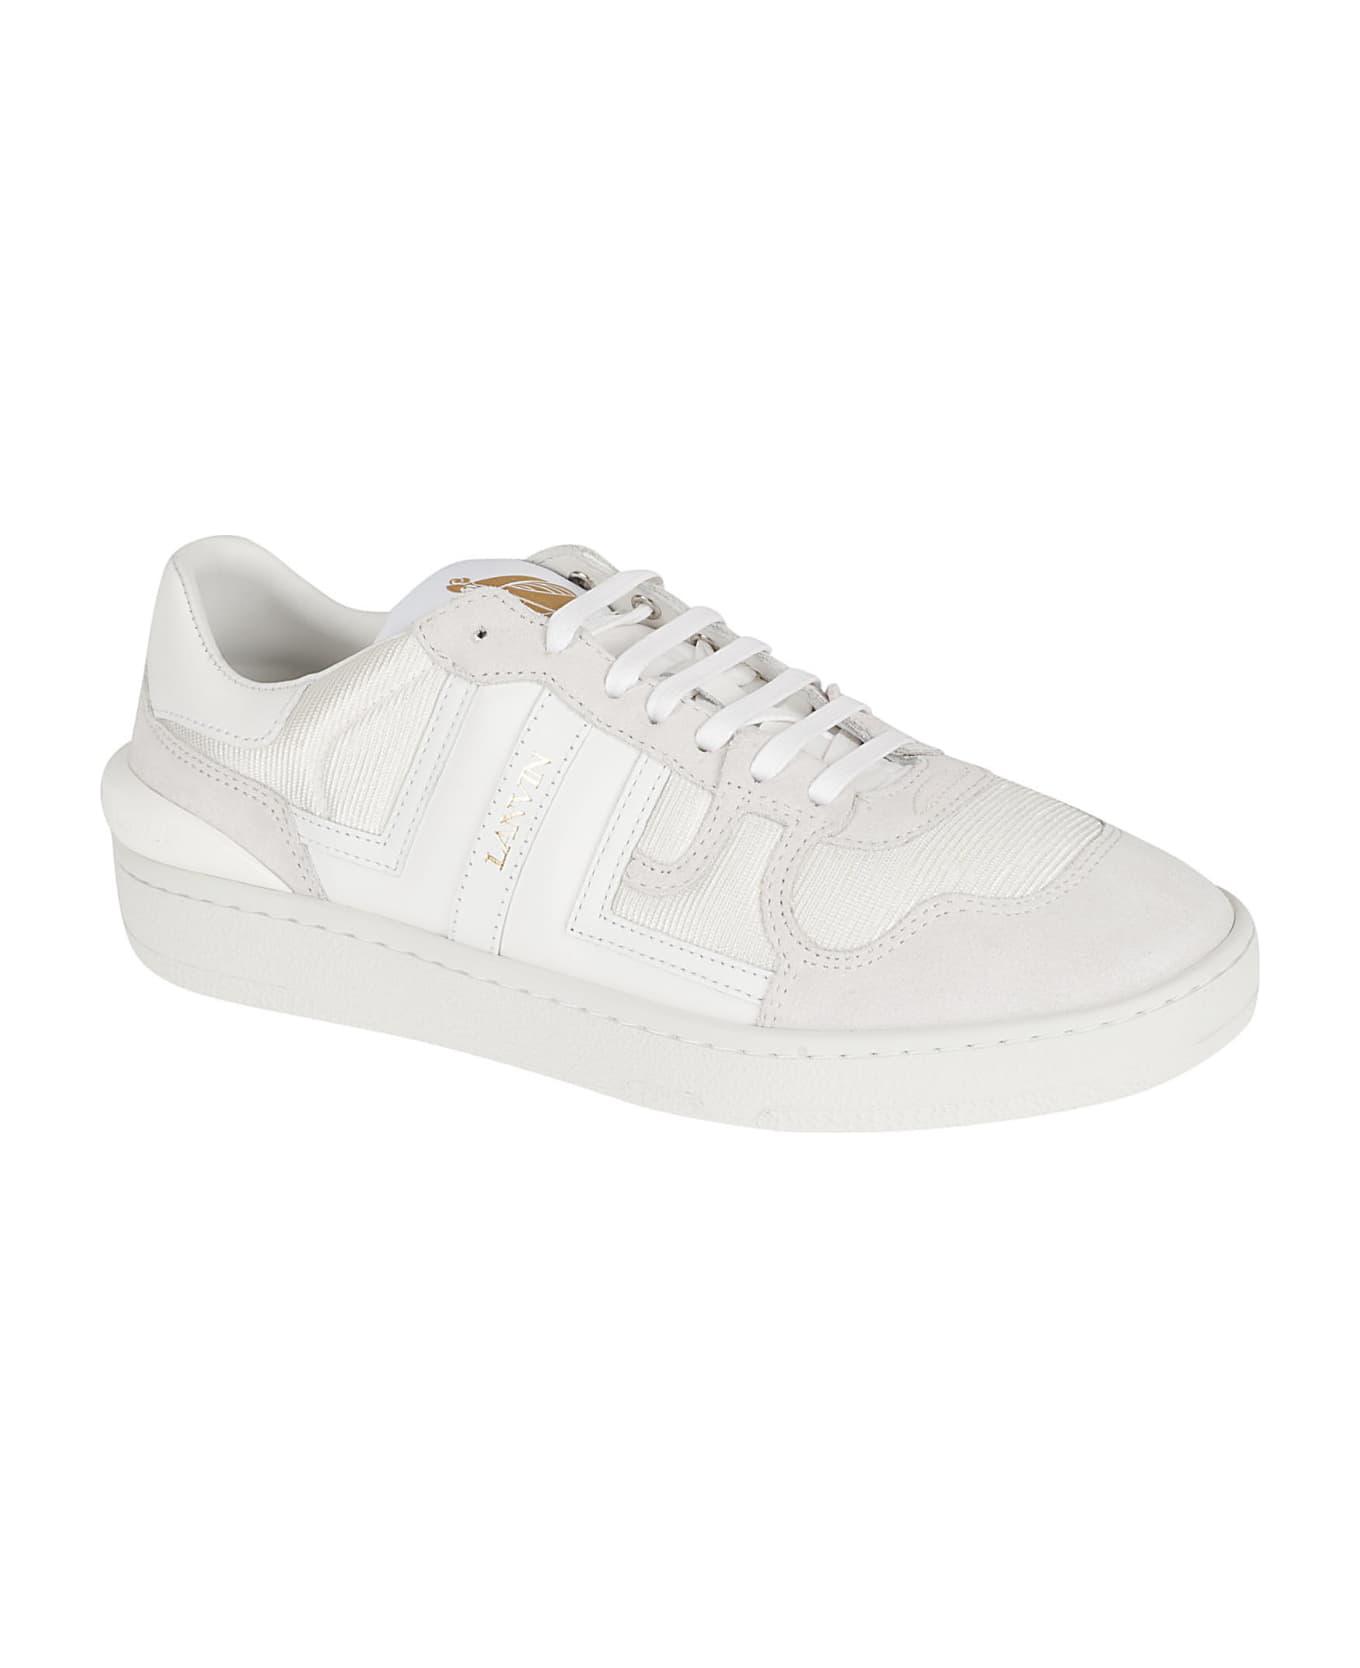 Lanvin Clay Low Top Sneakers - White